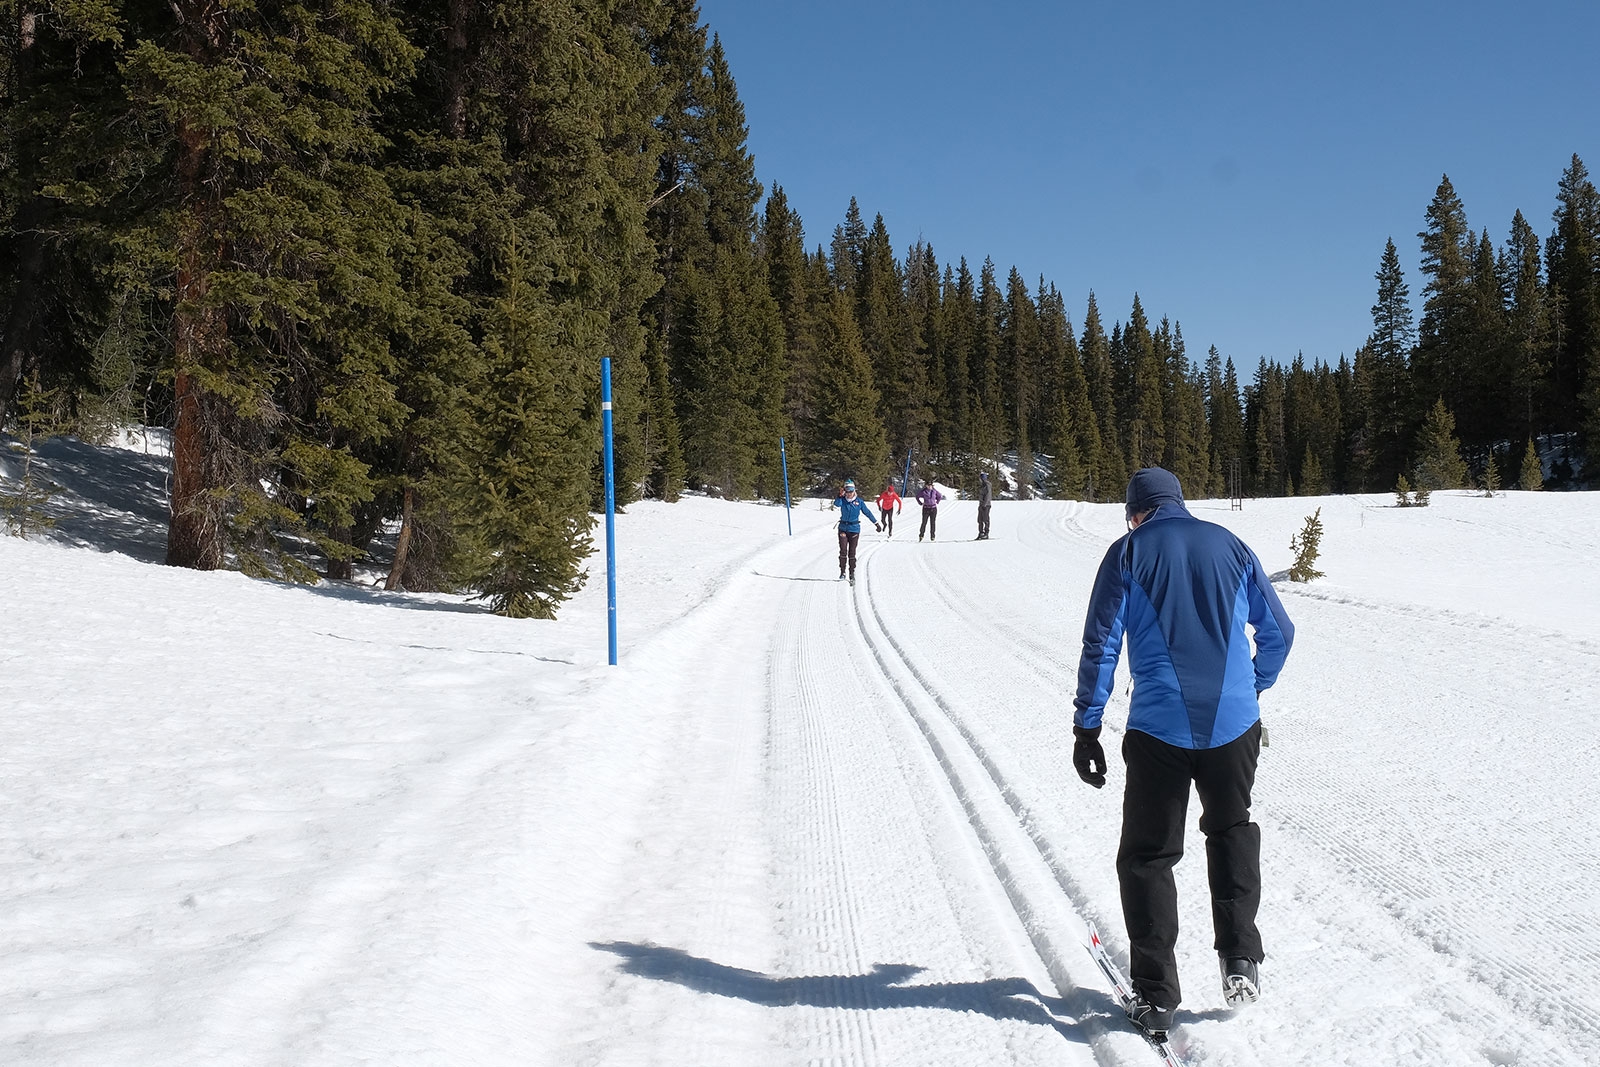 Make it easy for the customers of your Nordic center or a ski area to book ski lessons.